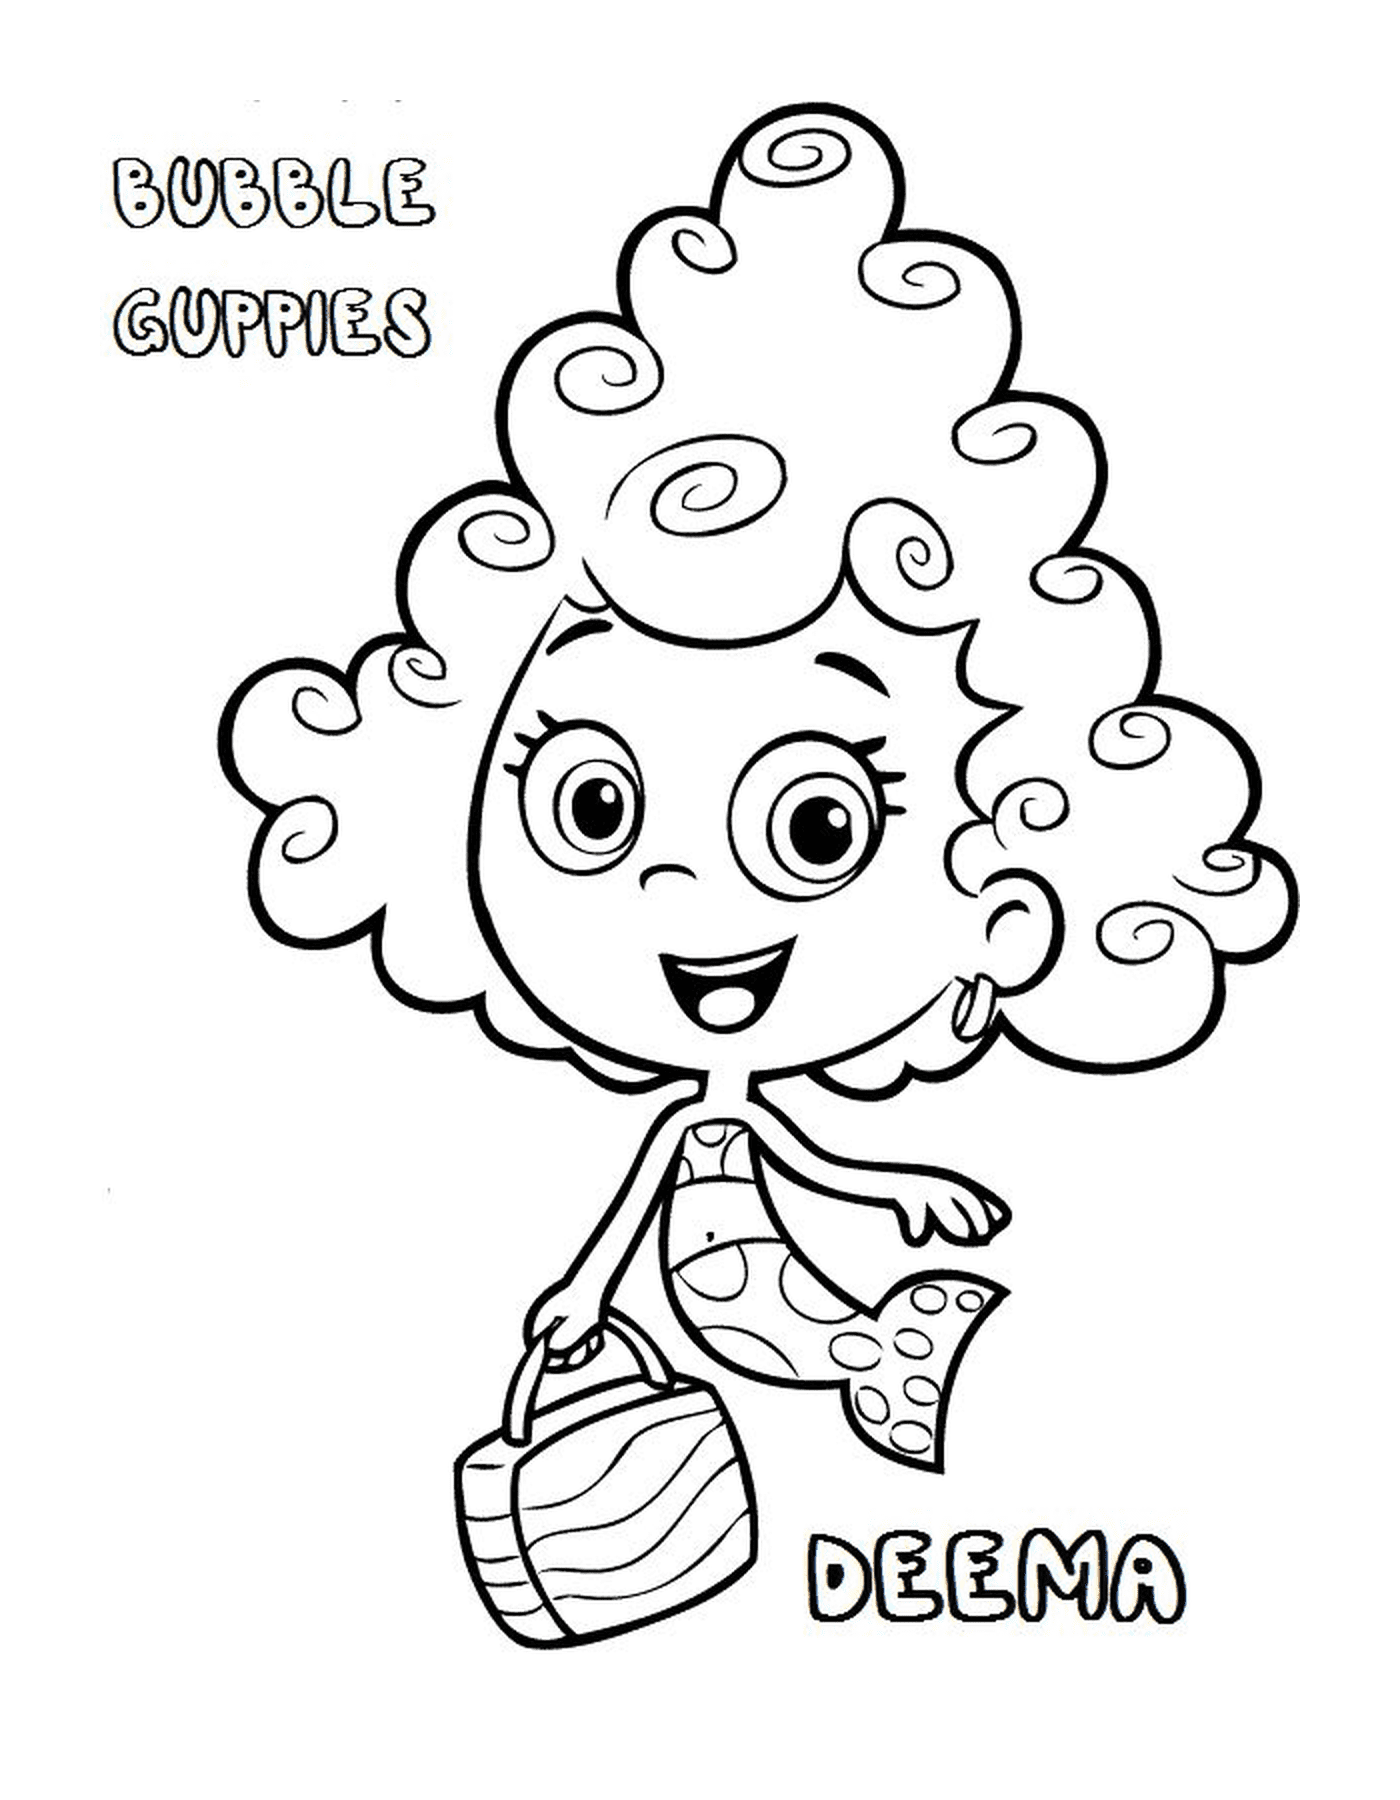  Deema of the Bubble Guppies, a girl with curly hair 